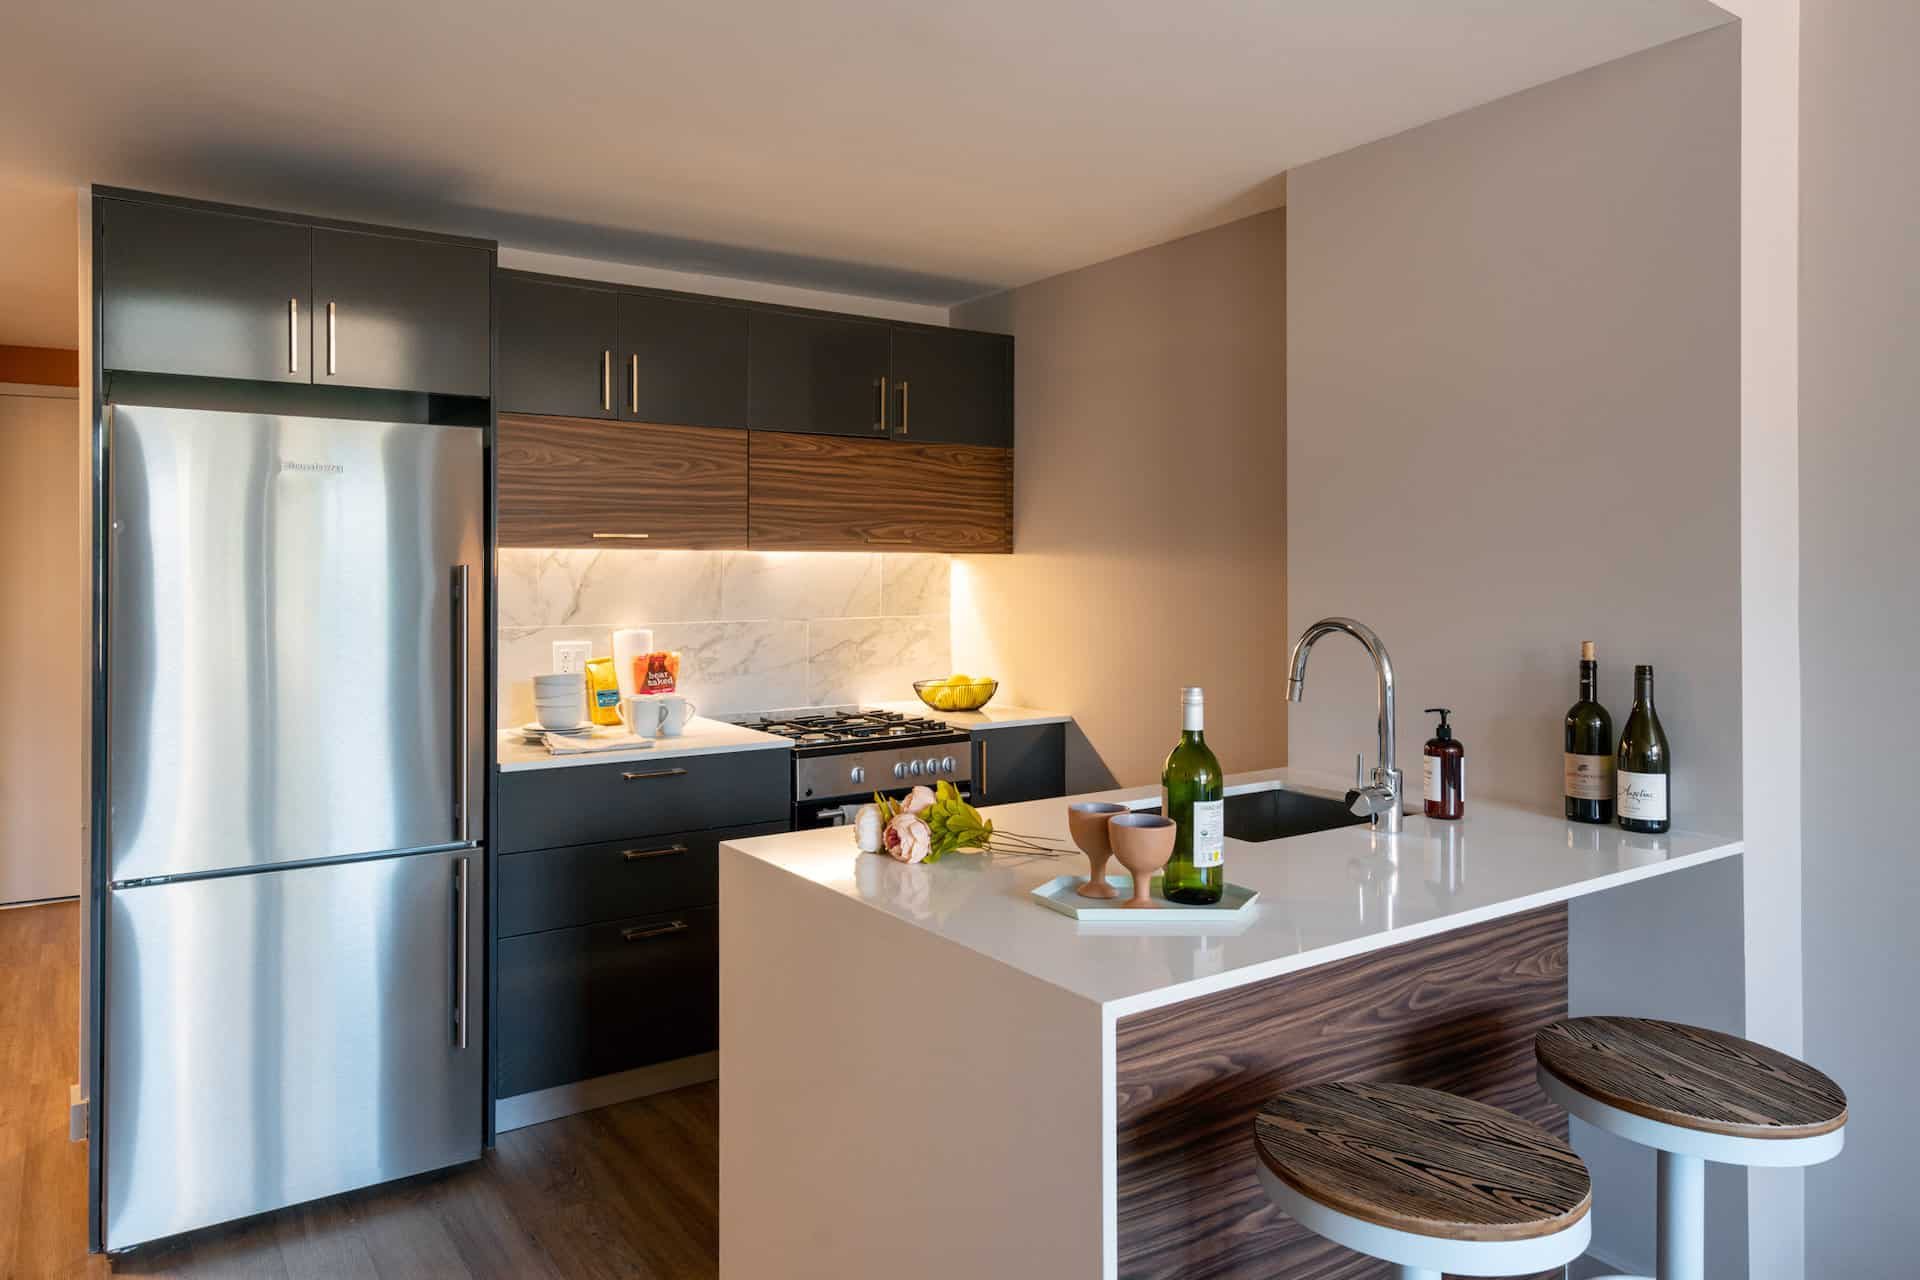 Kitchen at 222 Johnson Avenue apartments with stone countertops, bar seating, stainless steel appliances and hardwood floors.